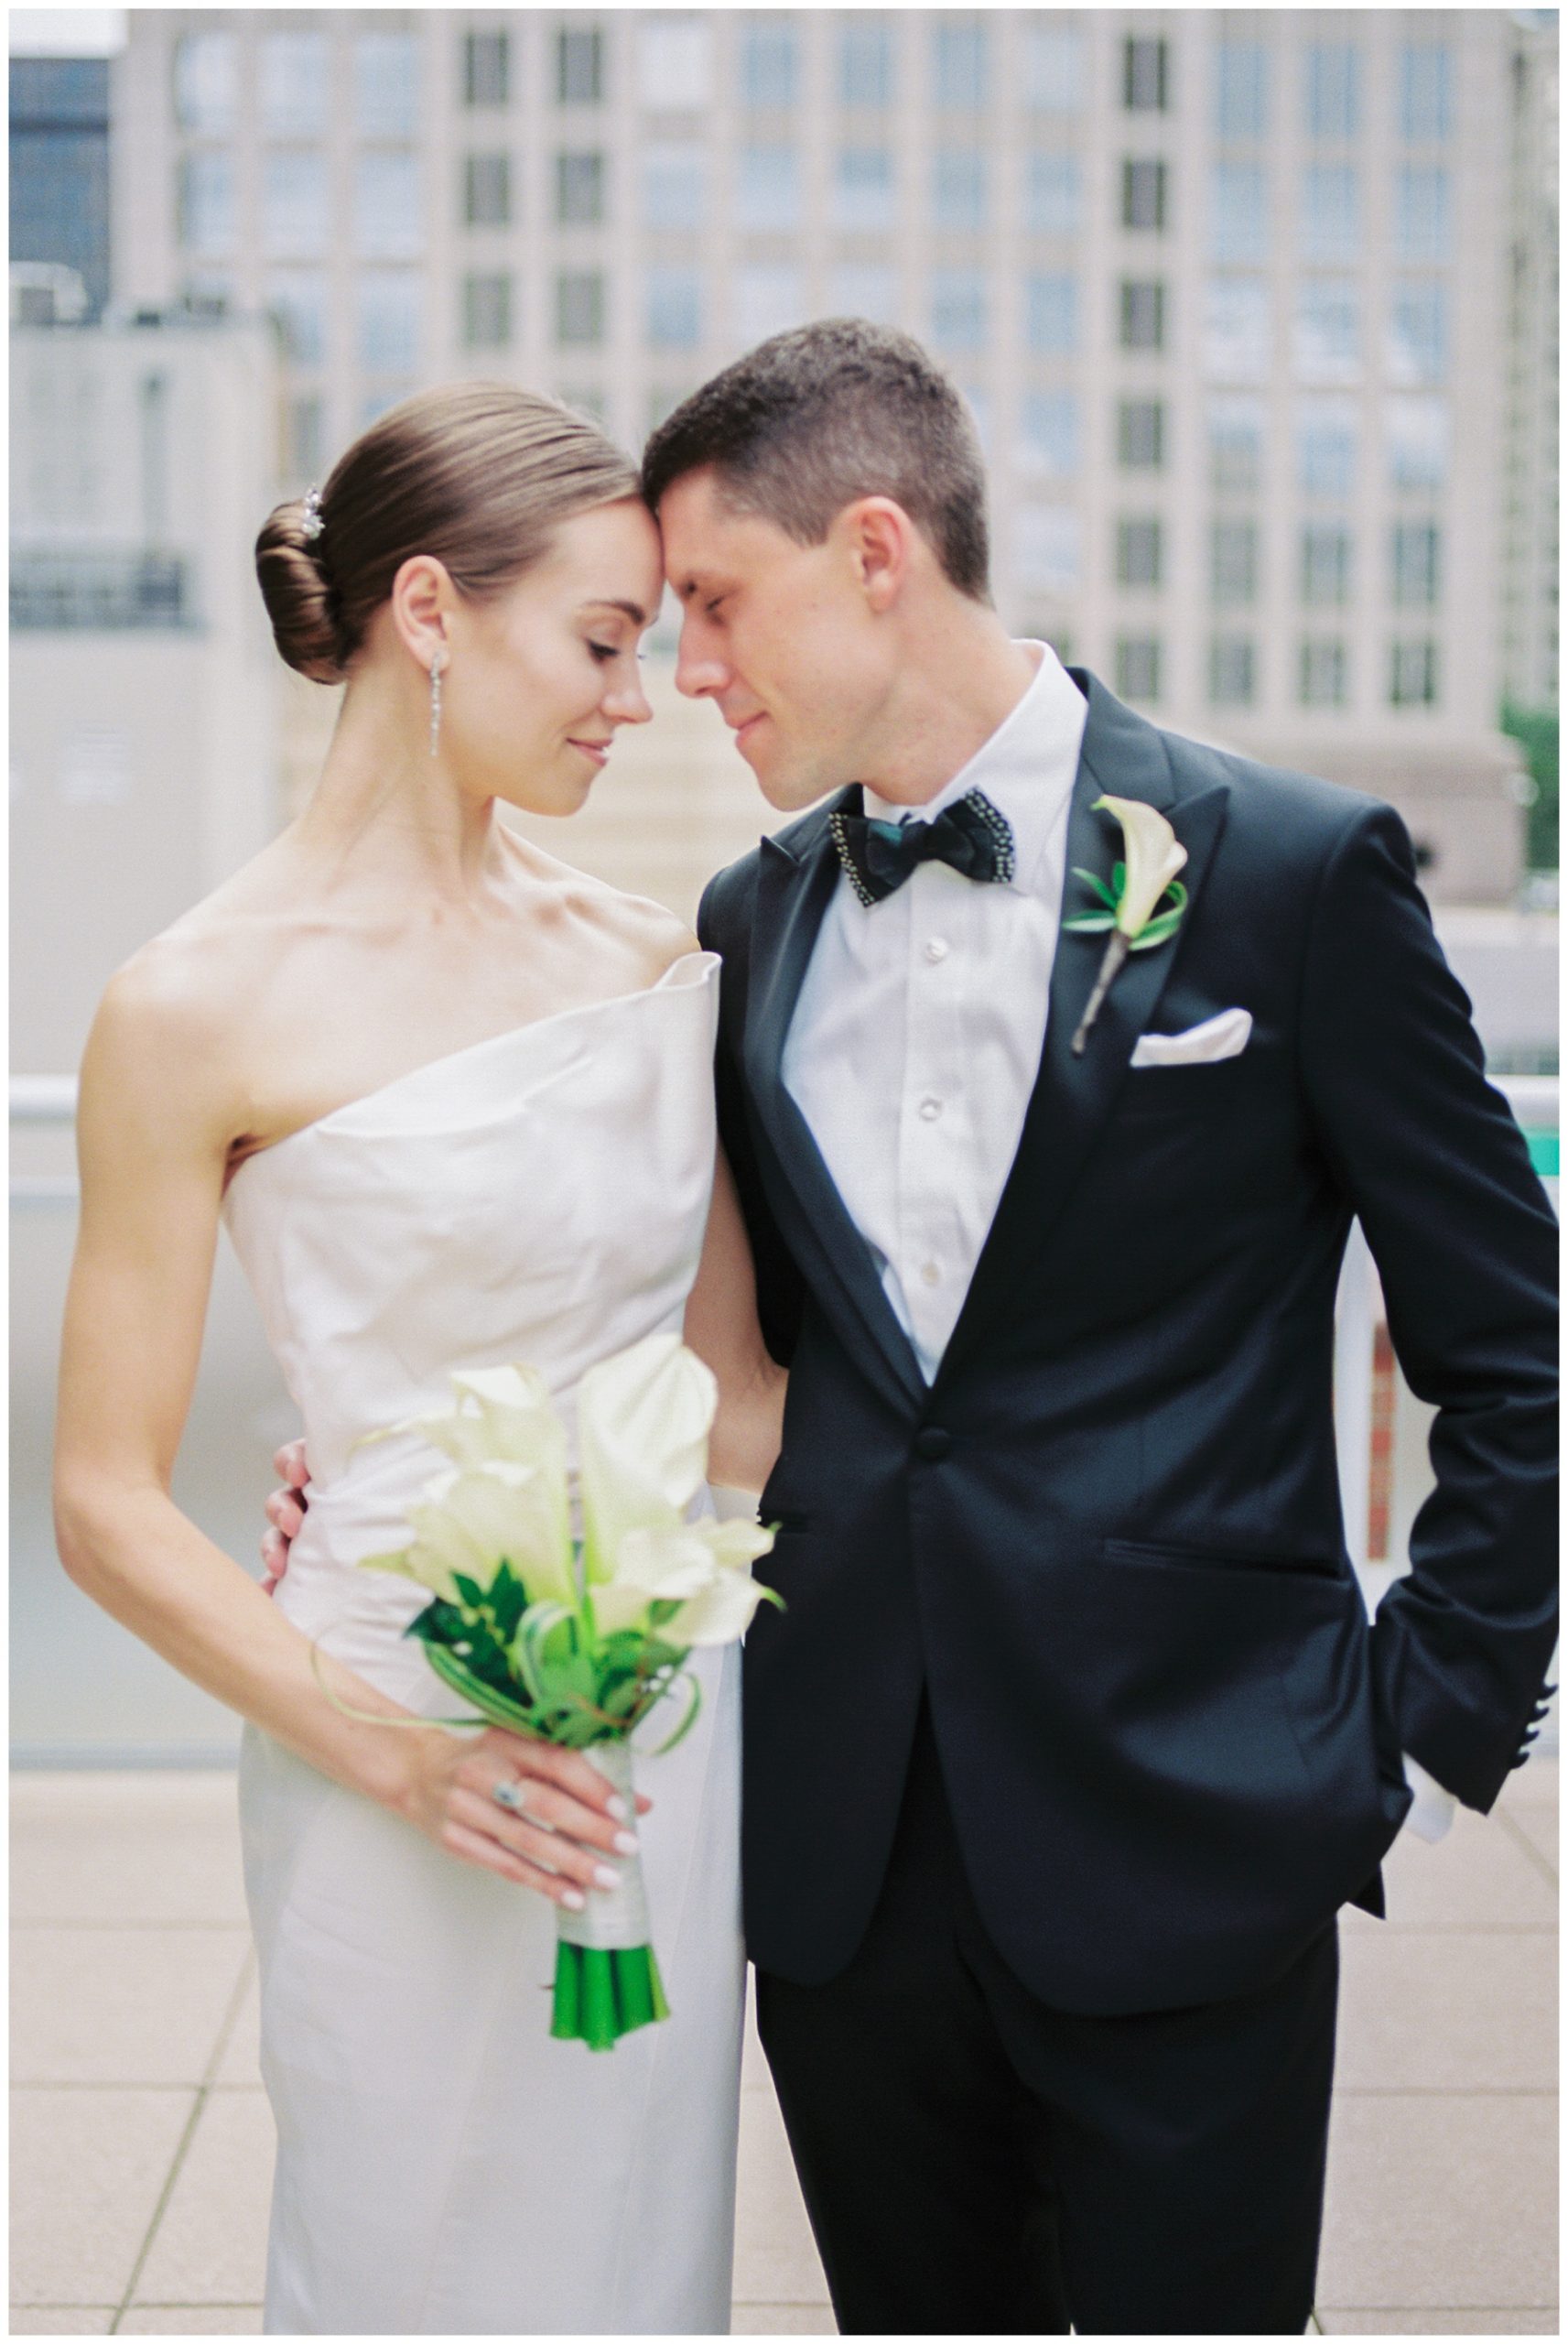 bride holding calla lilies touches foreheads with groom during portraits in Charlotte NC